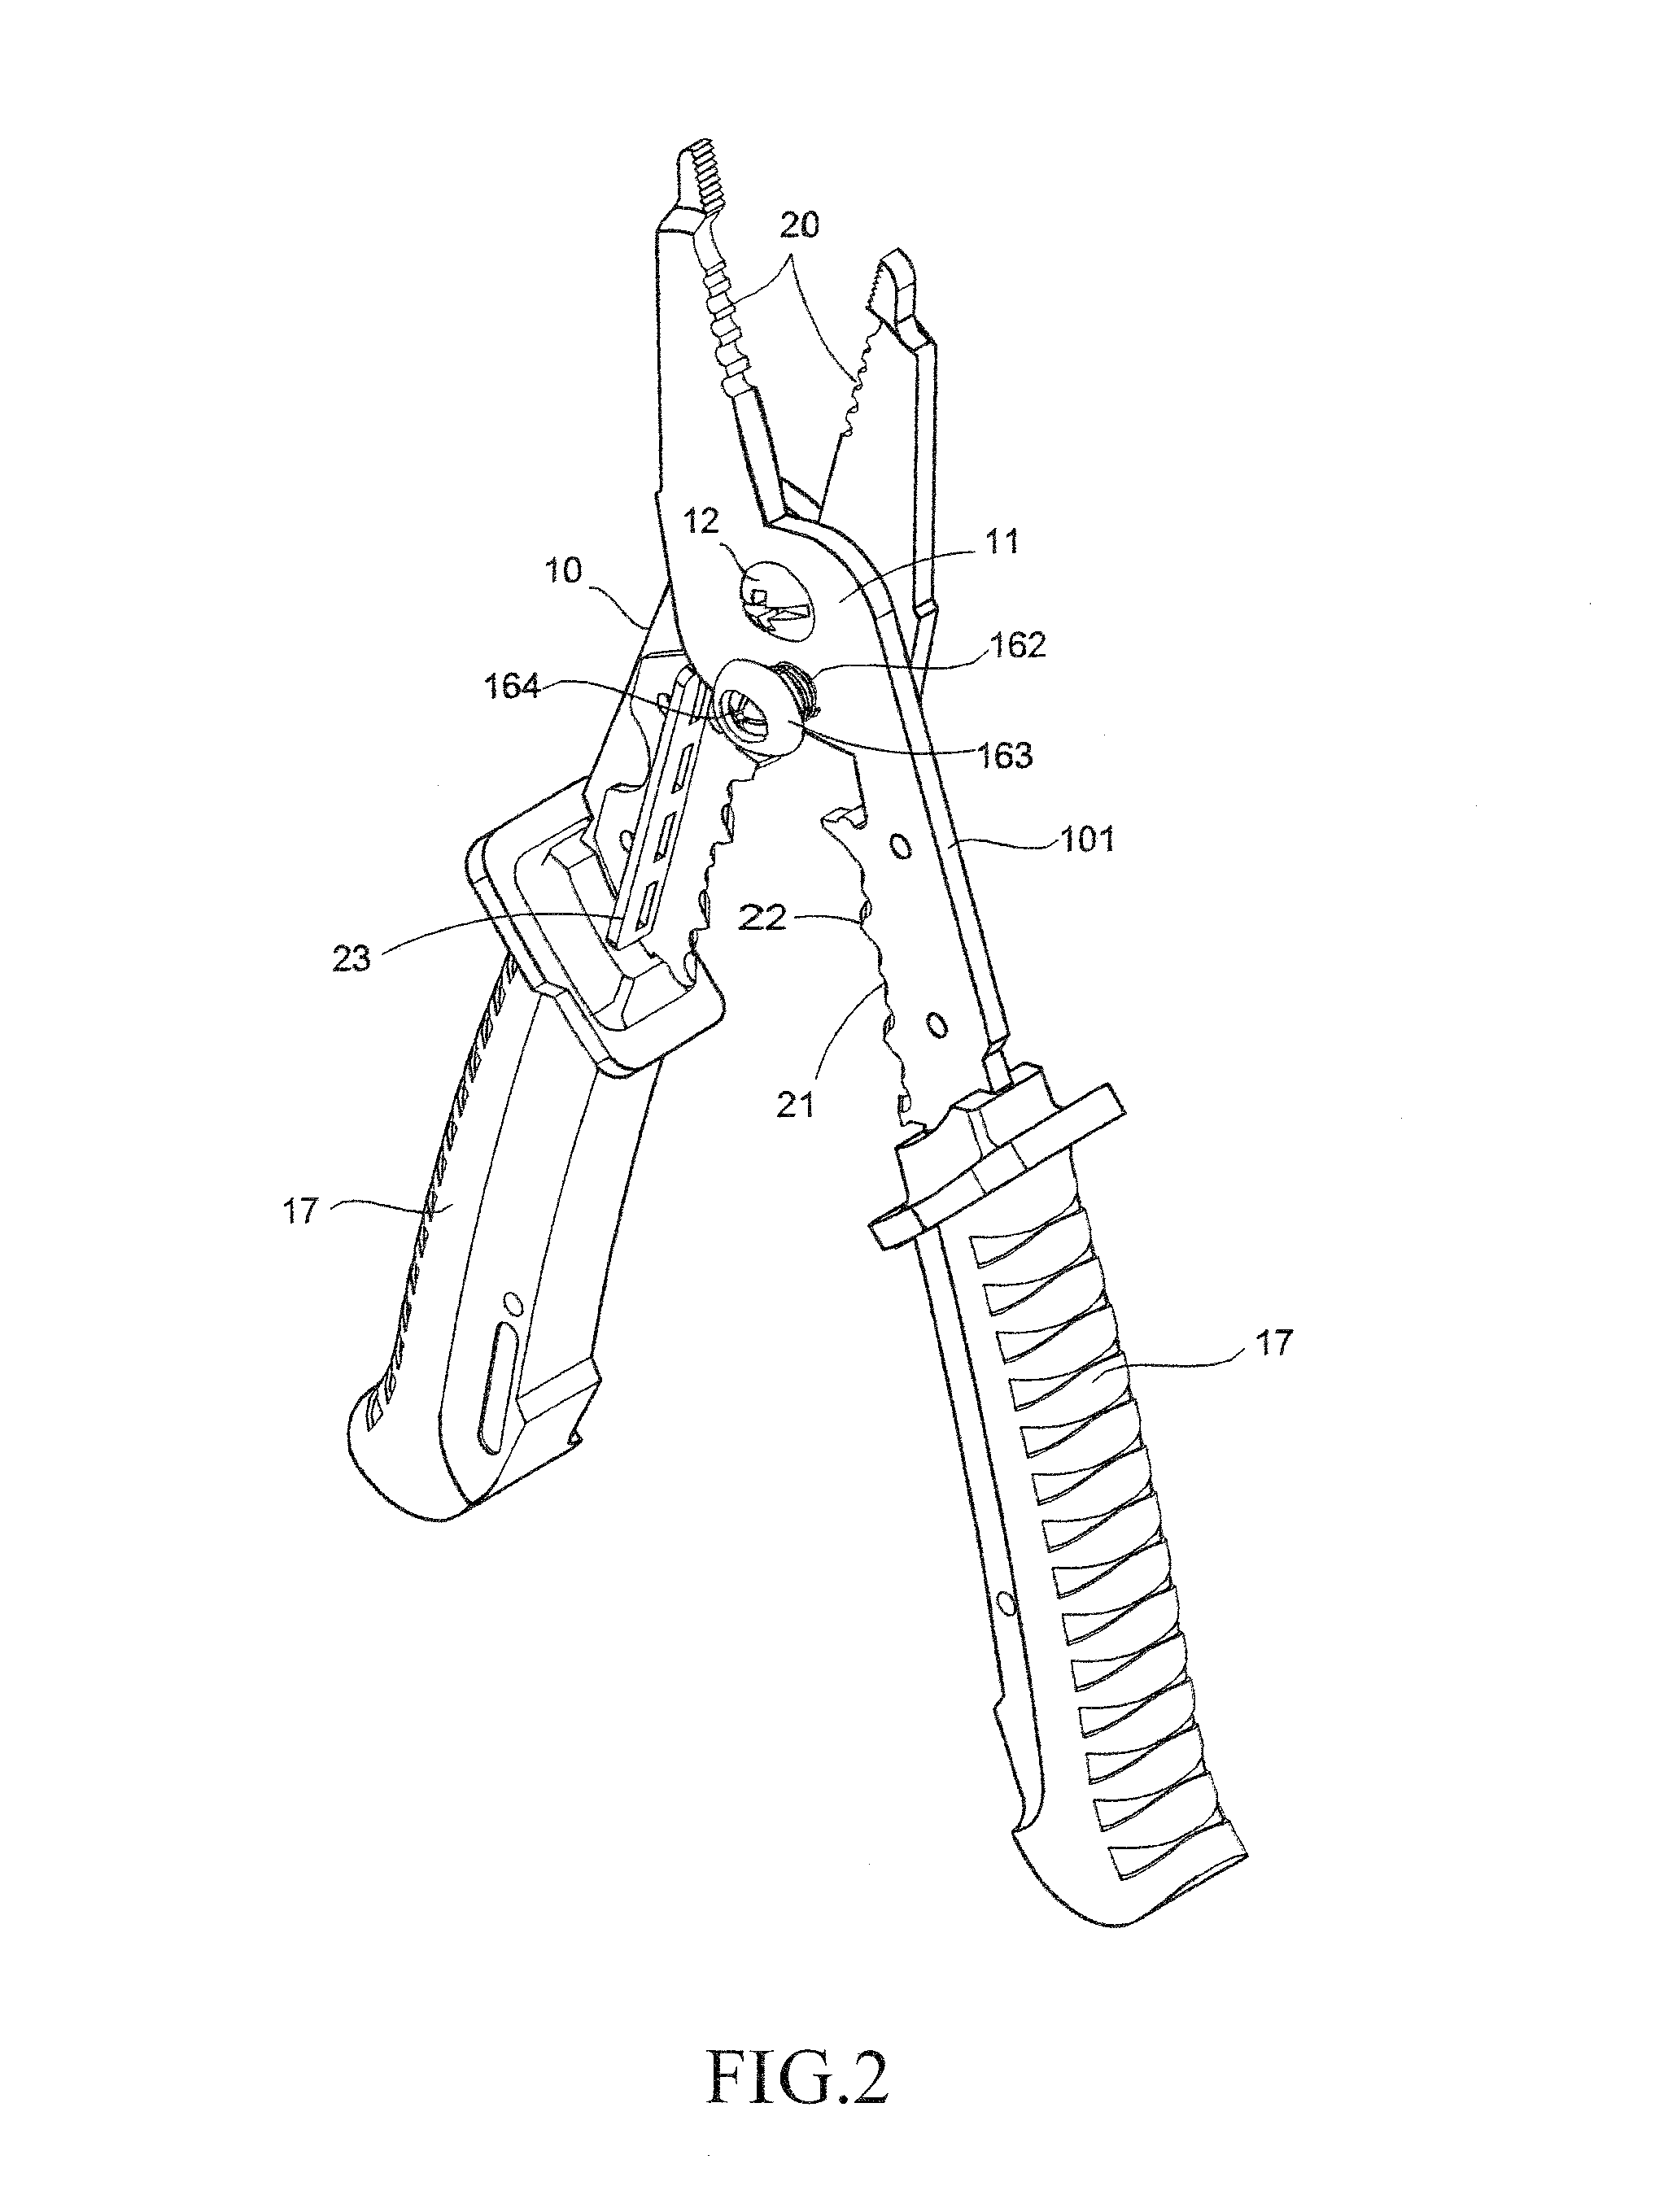 Locking structure of multifunctional stripping/cutting pliers